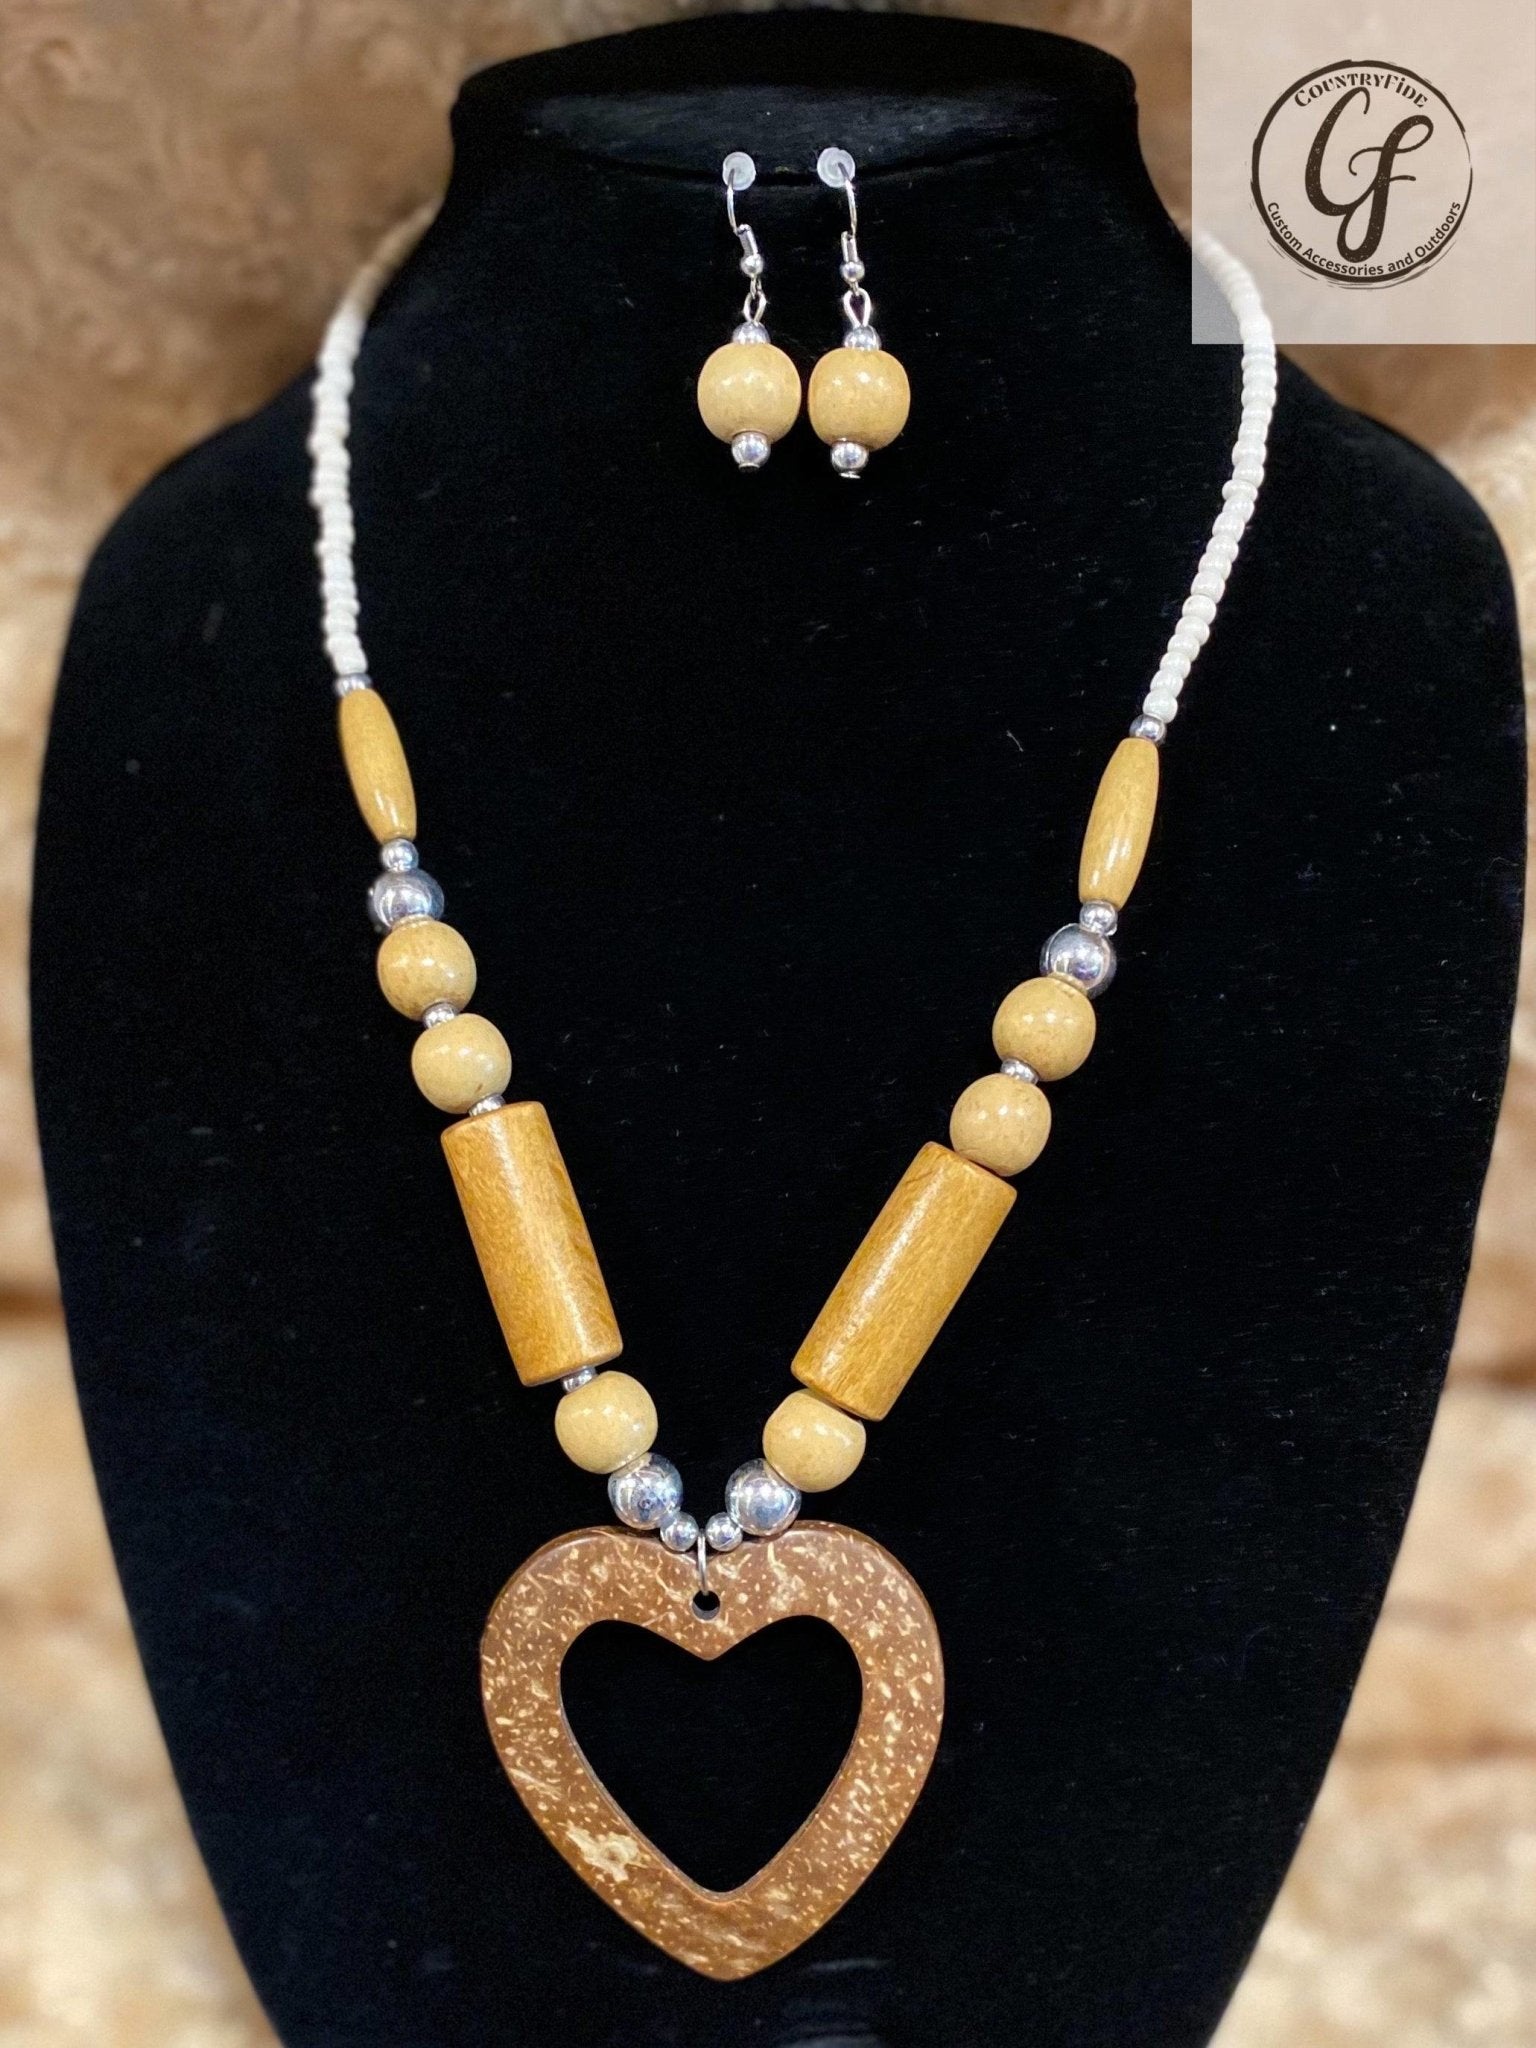 Wood Heart Necklace With Matching Earrings - CountryFide Custom Accessories and Outdoors